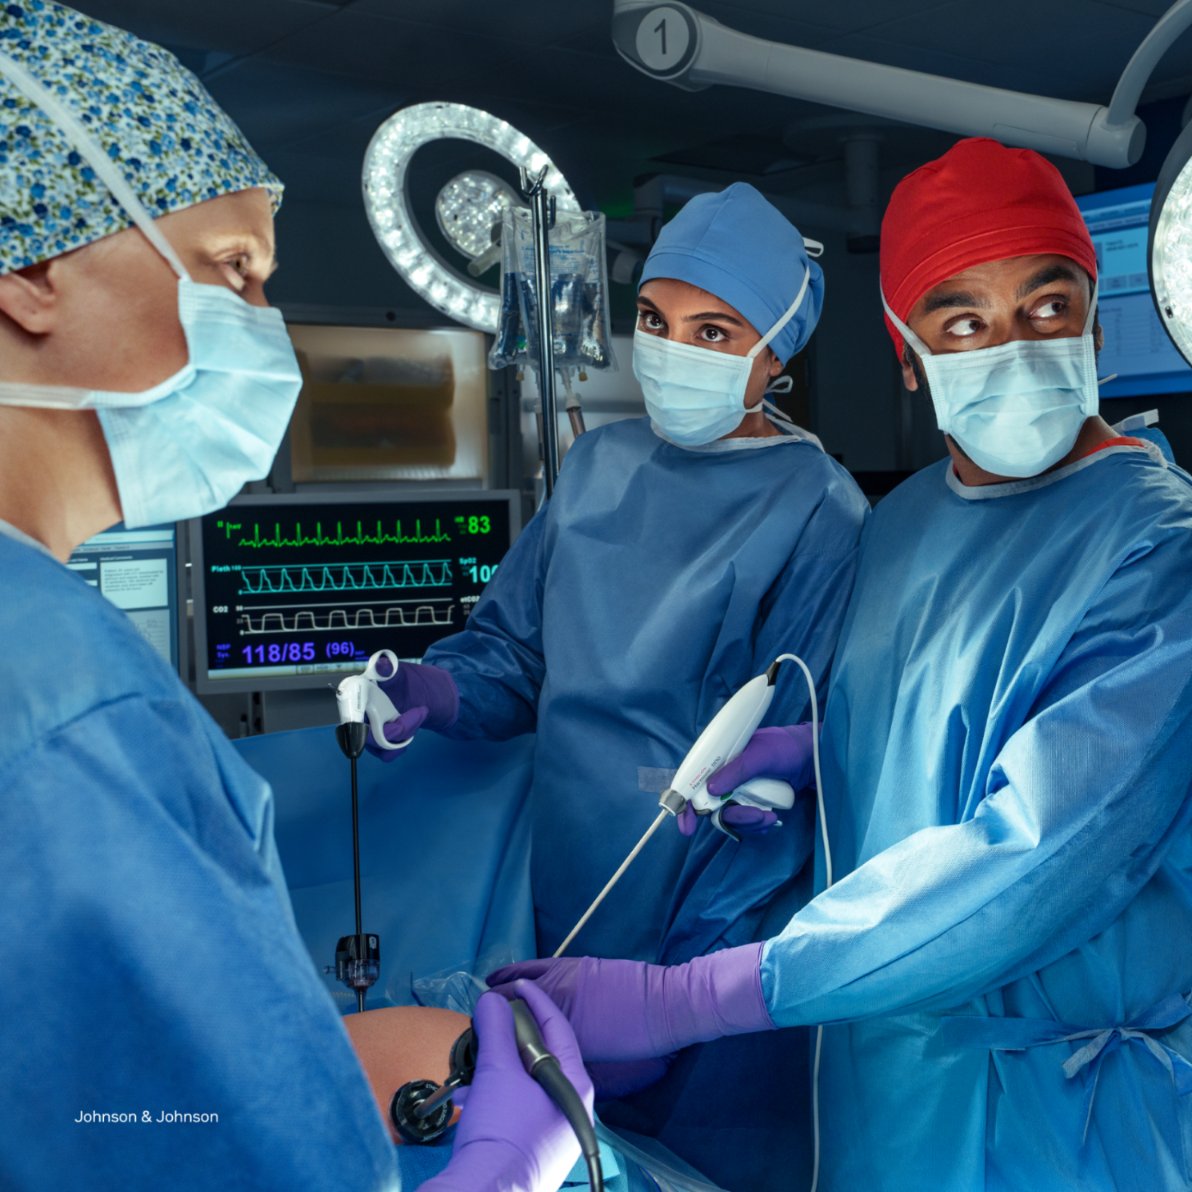 Announced today, NVIDIA is working with @JNJMedTech to test new AI capabilities for Johnson & Johnson’s connected digital ecosystem for #surgery. nvda.ws/49UVhaE #medicaldevices #digitalsurgery #GTC24